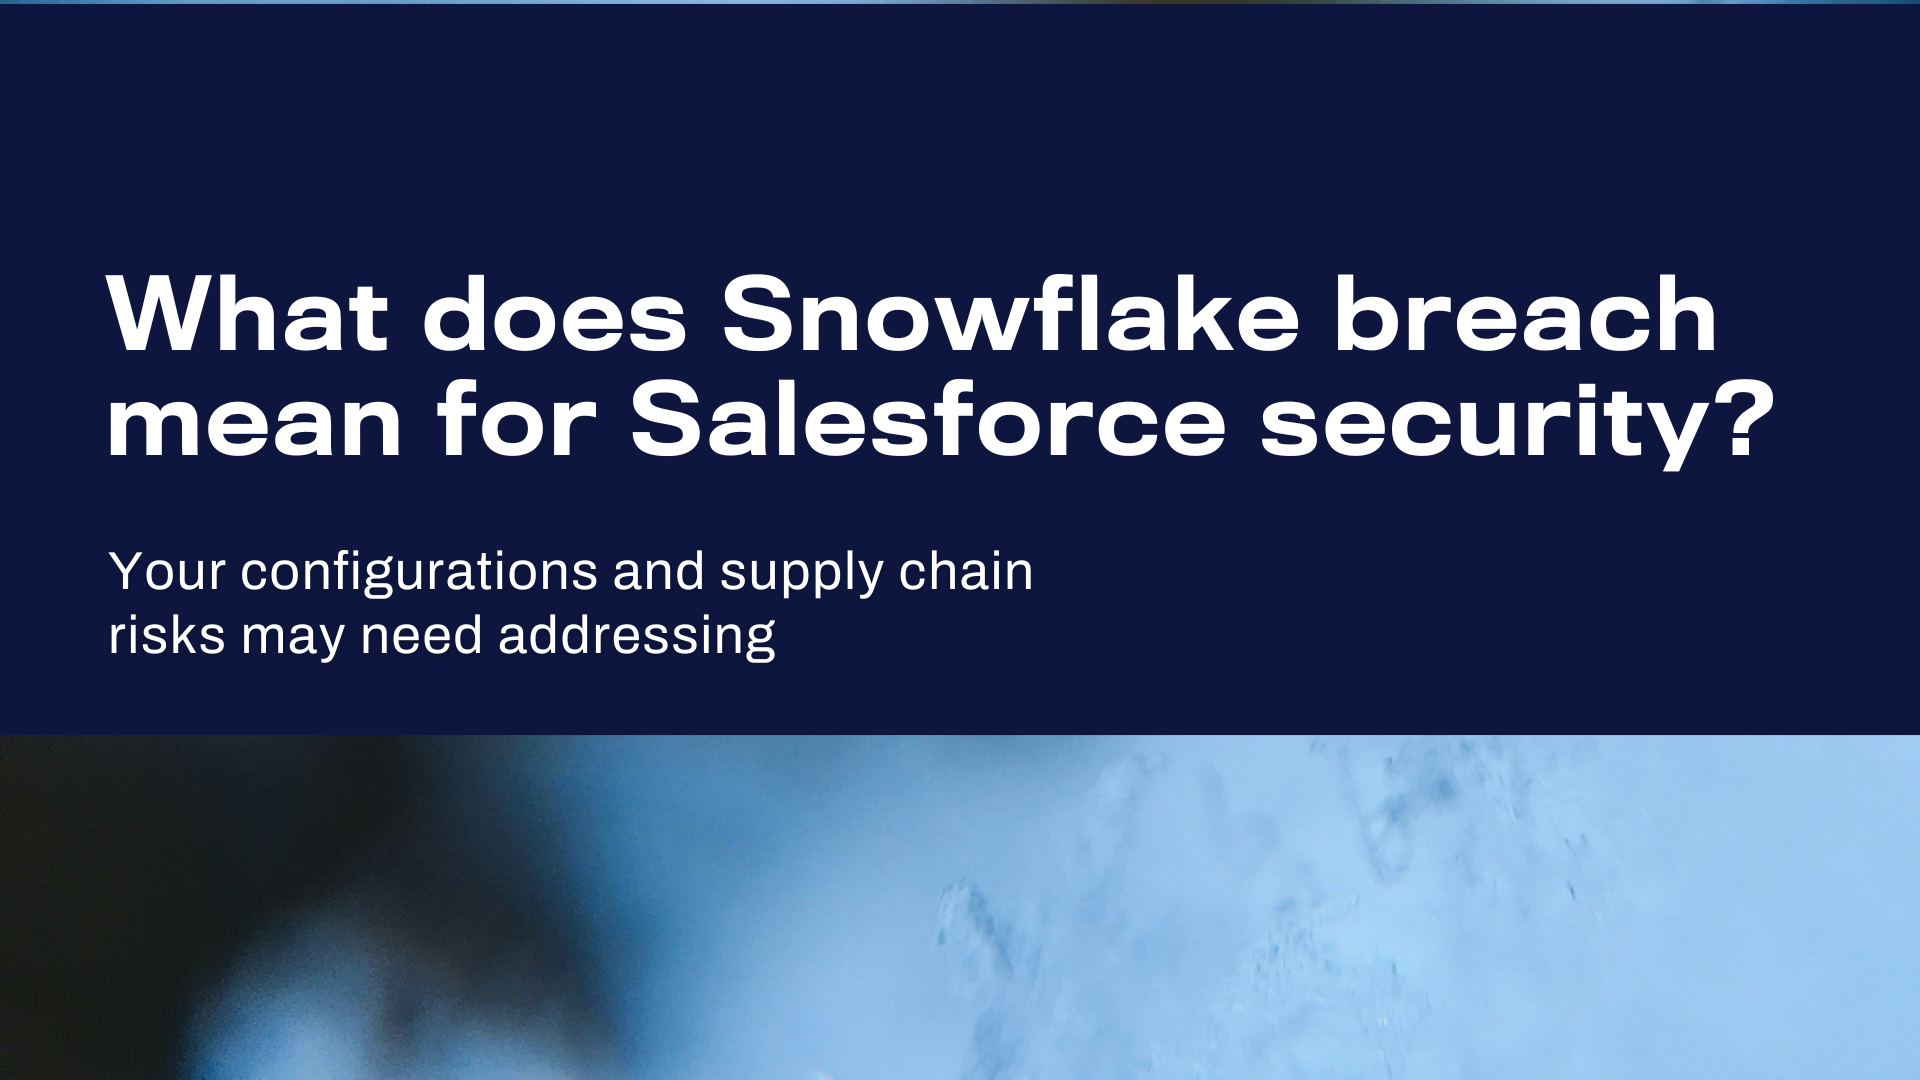 What does Snowflake breach mean for Salesforce security?